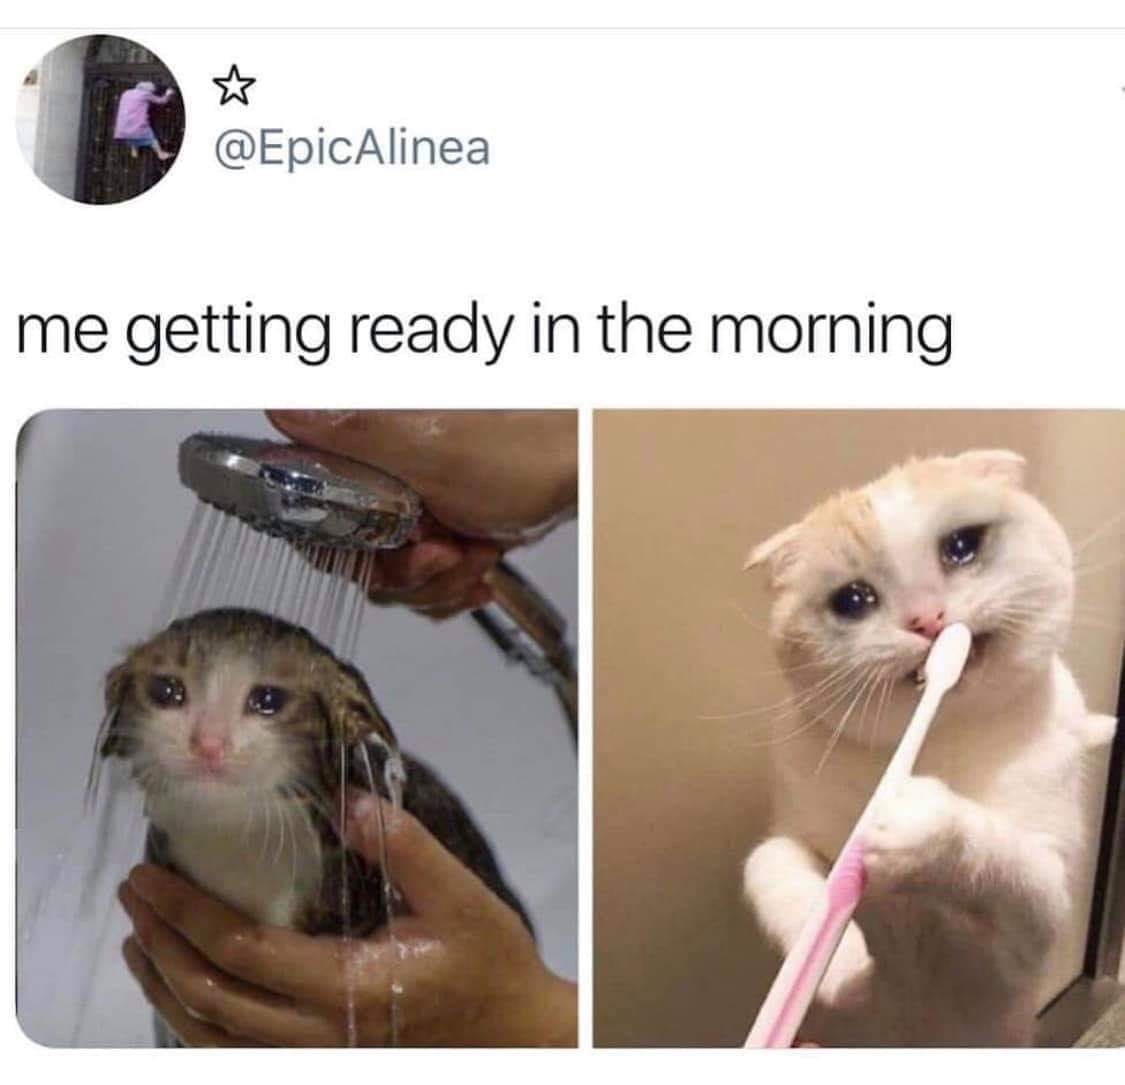 me getting ready in the morning meme - EpicAlinea me getting ready in the morning